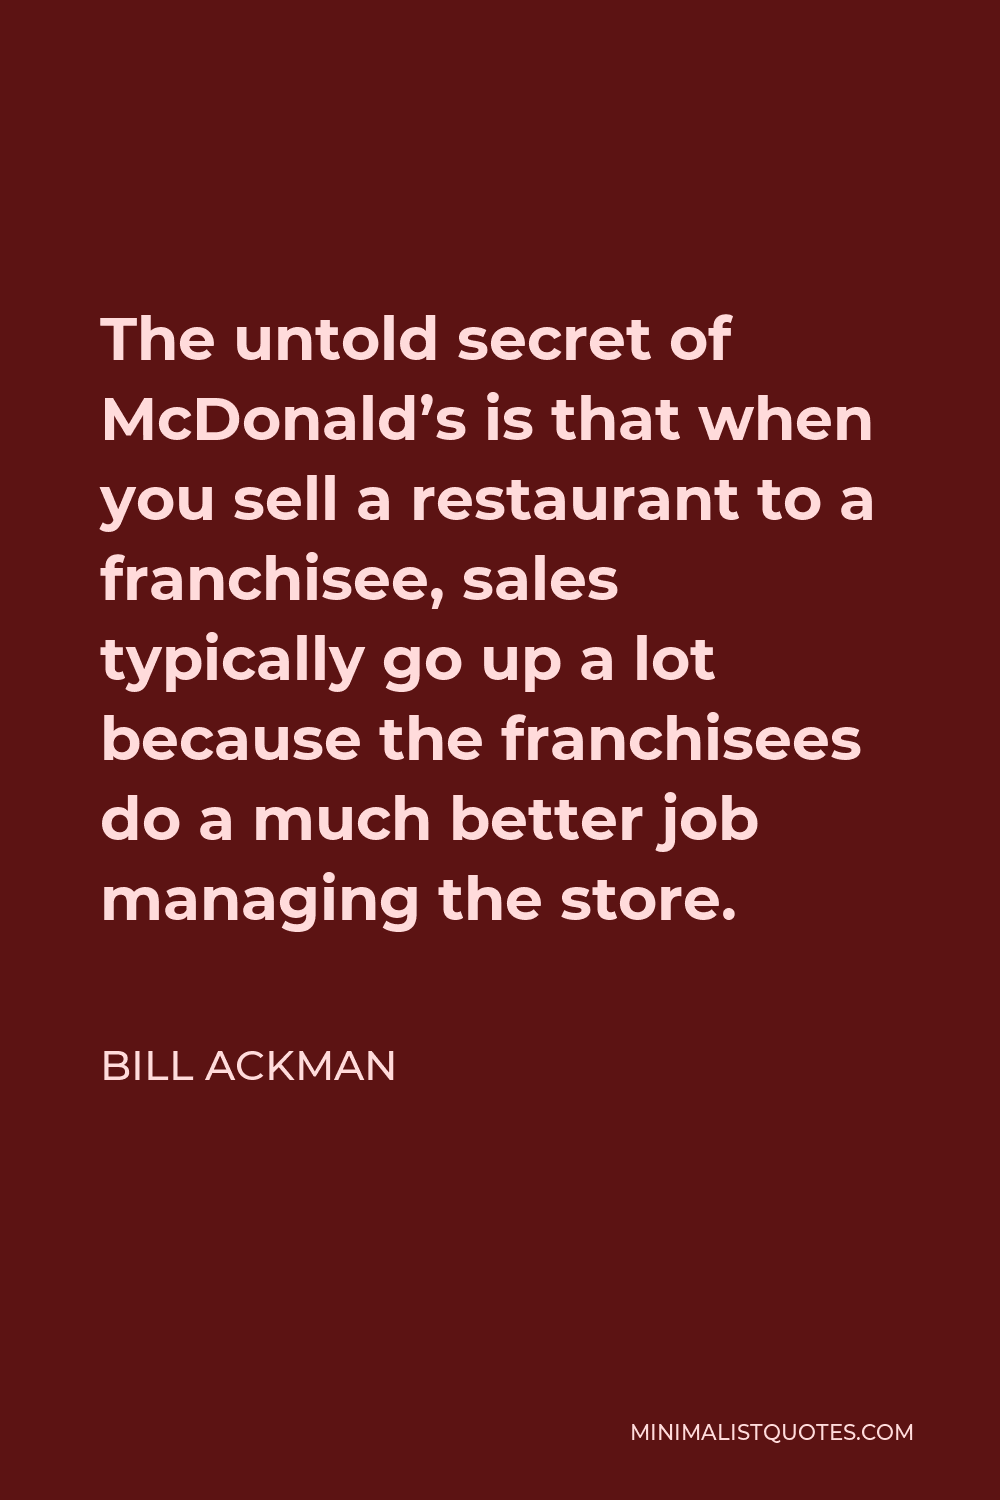 Bill Ackman Quote - The untold secret of McDonald’s is that when you sell a restaurant to a franchisee, sales typically go up a lot because the franchisees do a much better job managing the store.